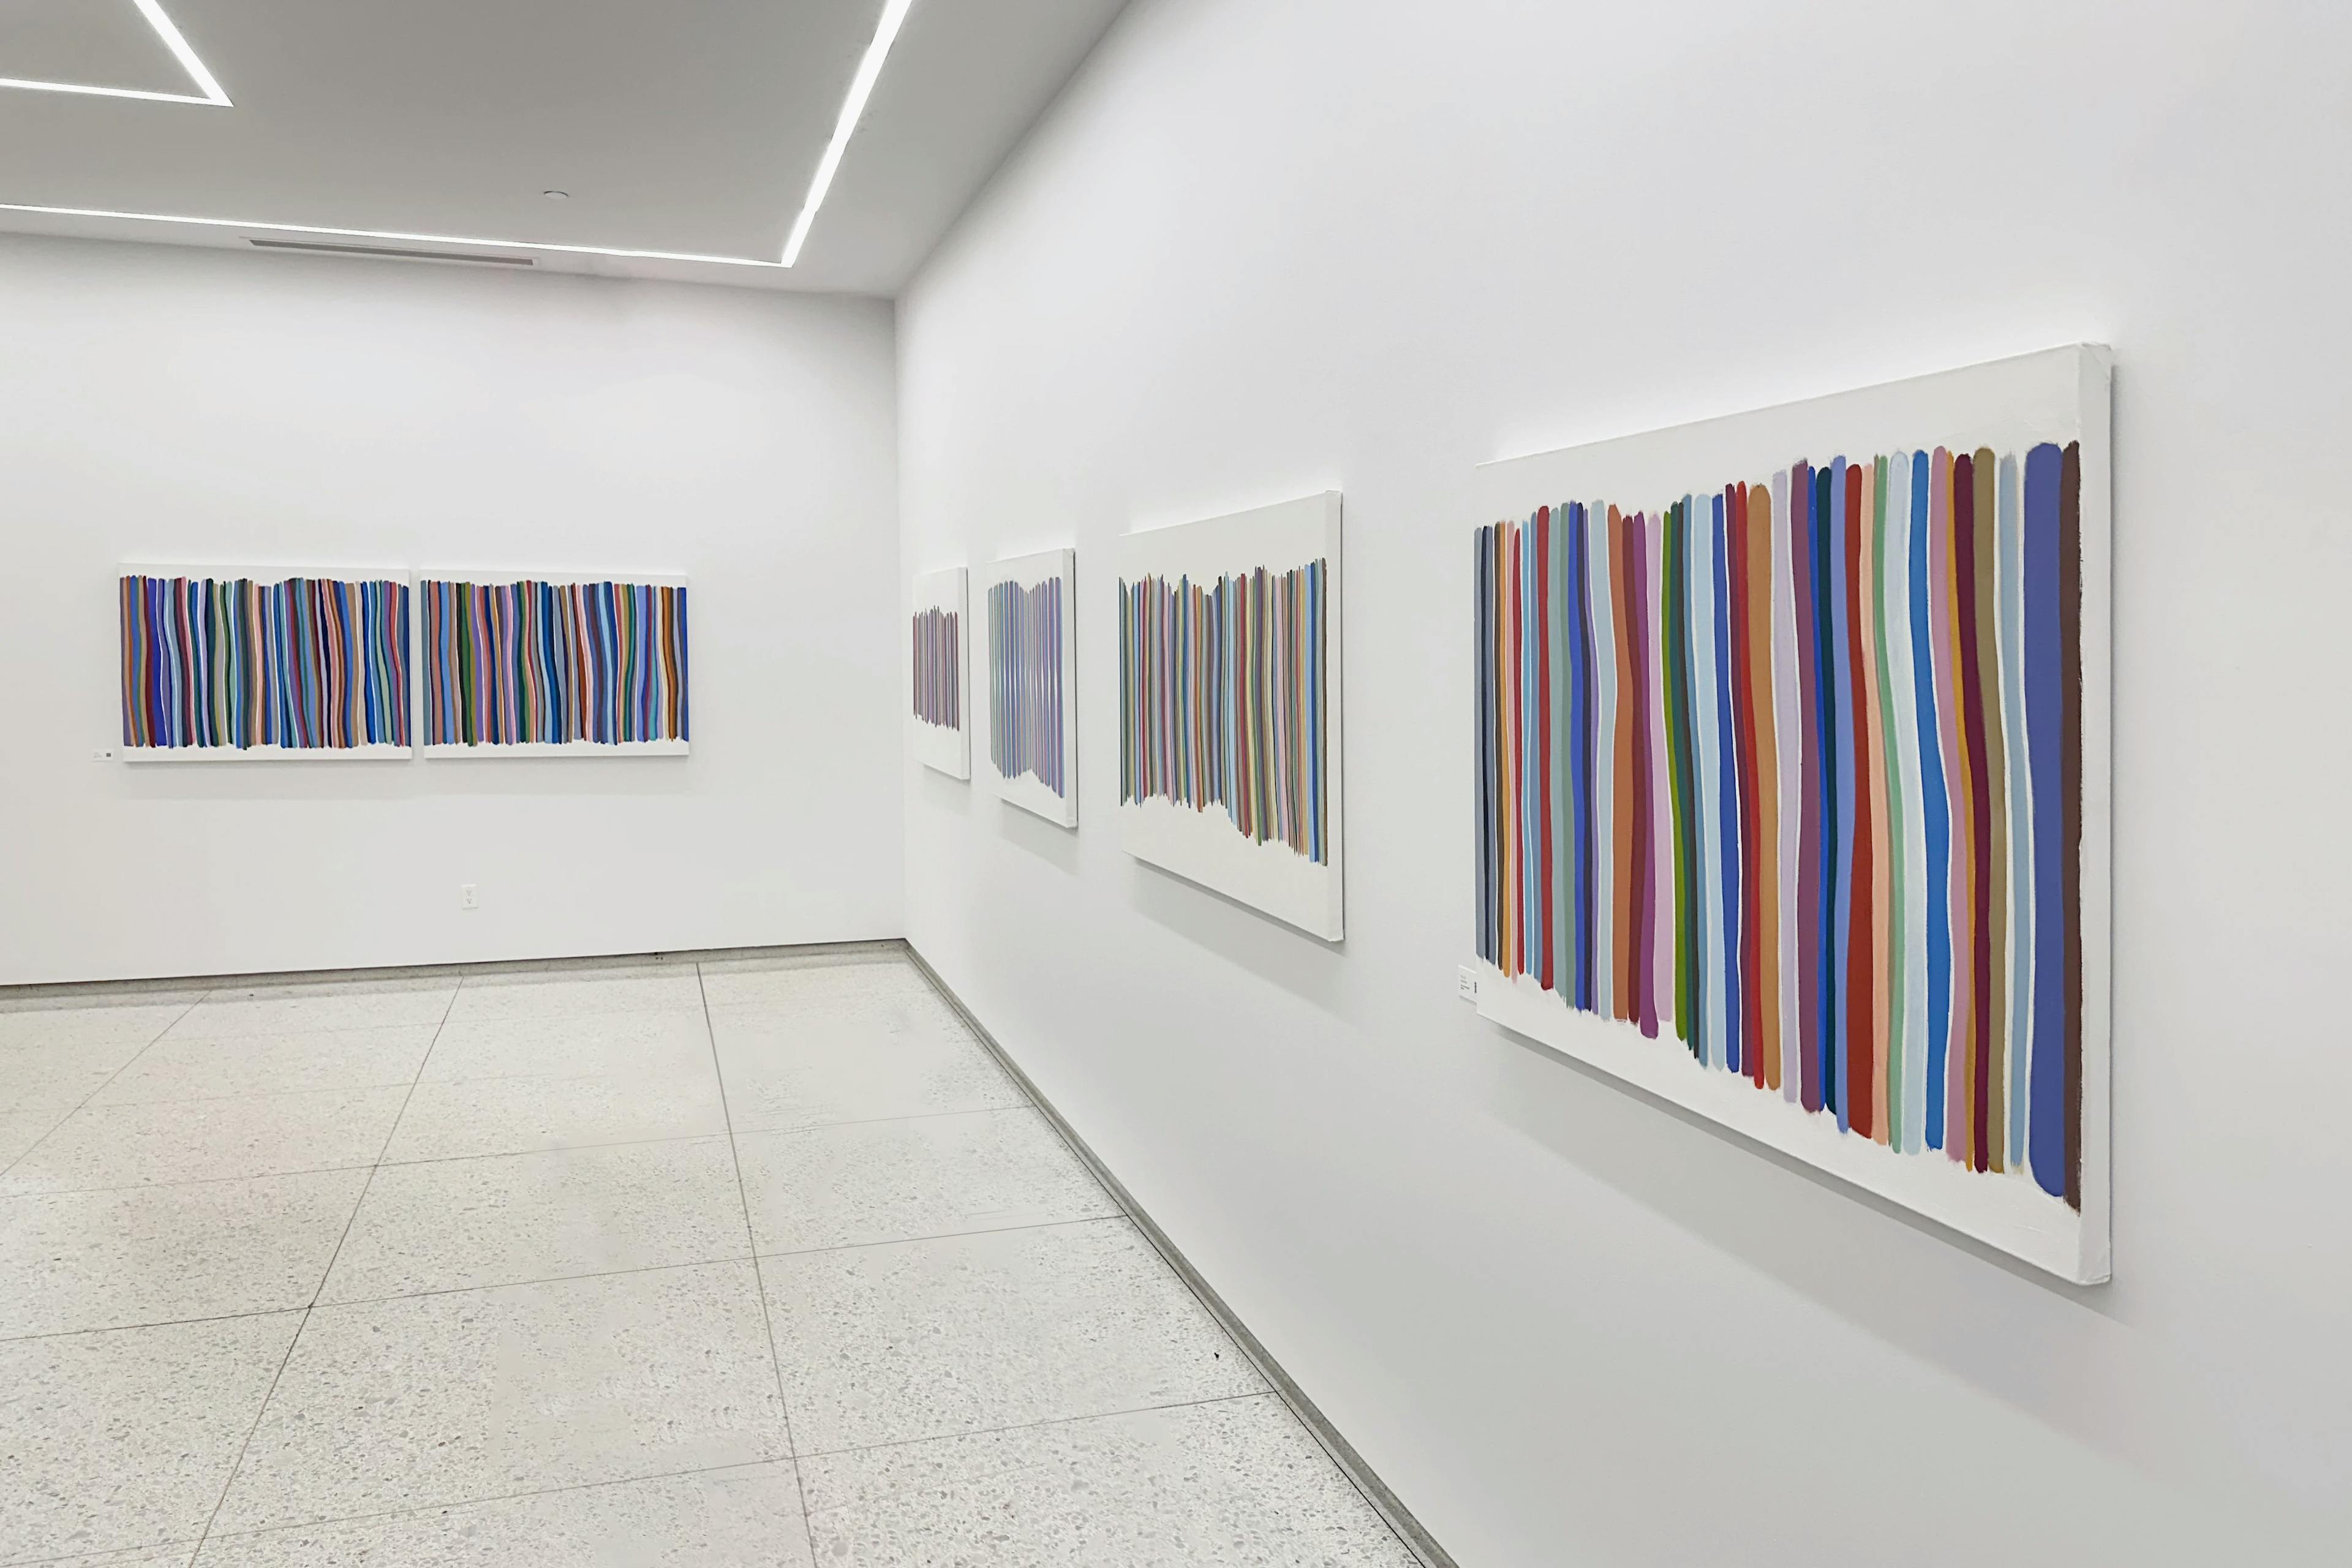 Artwork installed as part of Stories in Color, one of Uprise Art's Exhibitions in New York, NY.